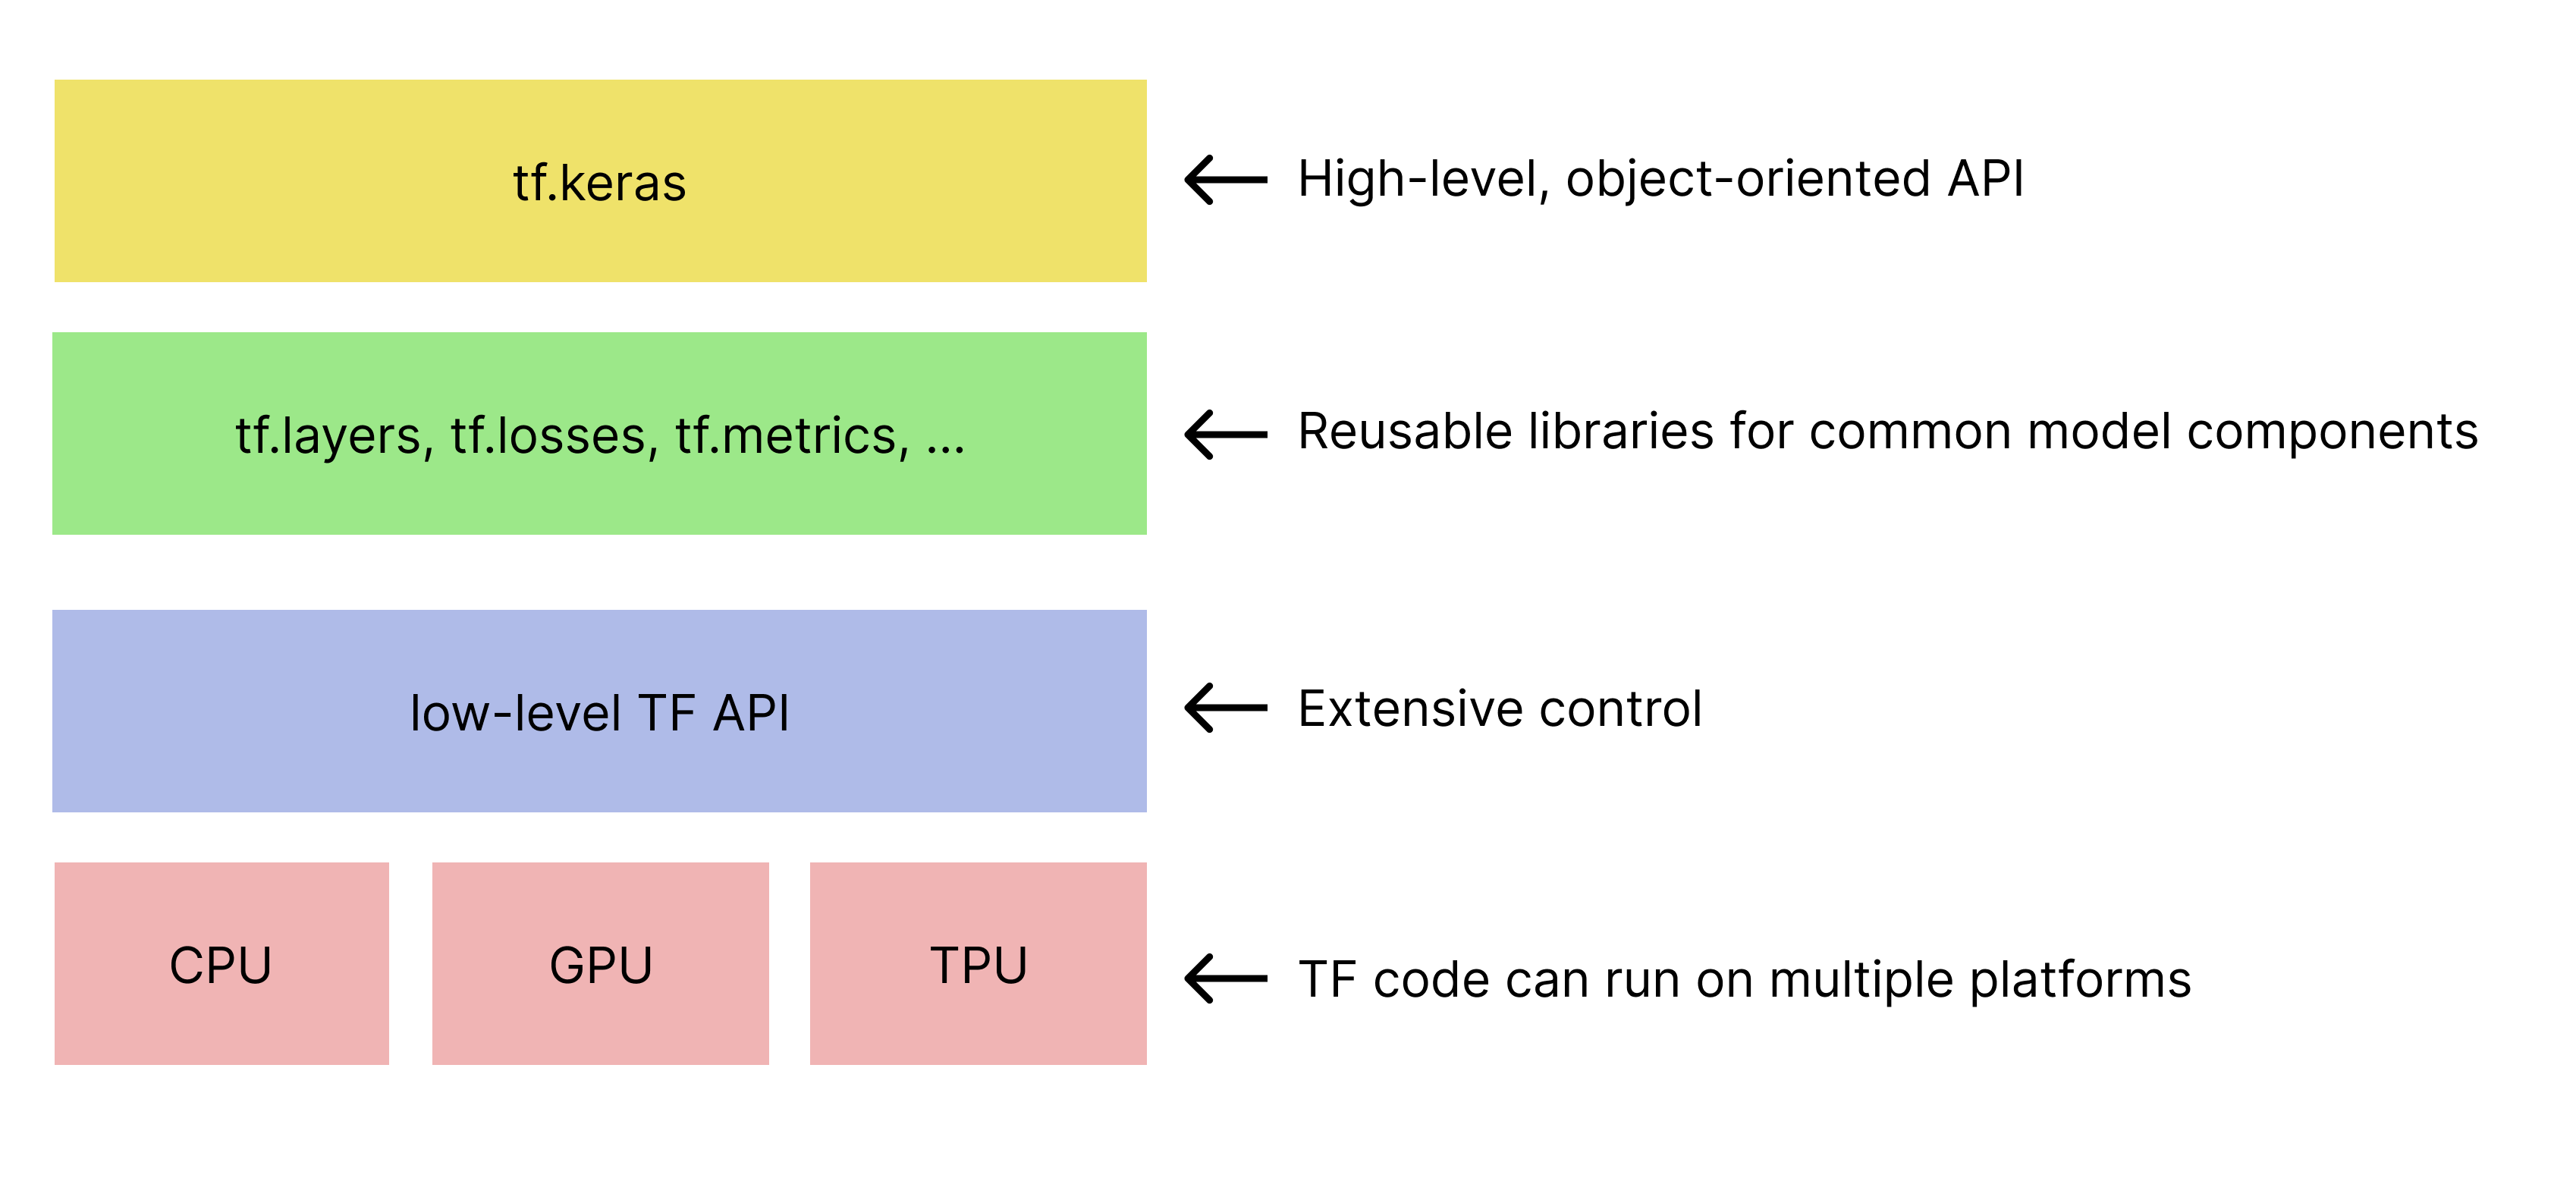 Simplified hierarchy of TensorFlow toolkits. 
   tf.keras API is at the top.